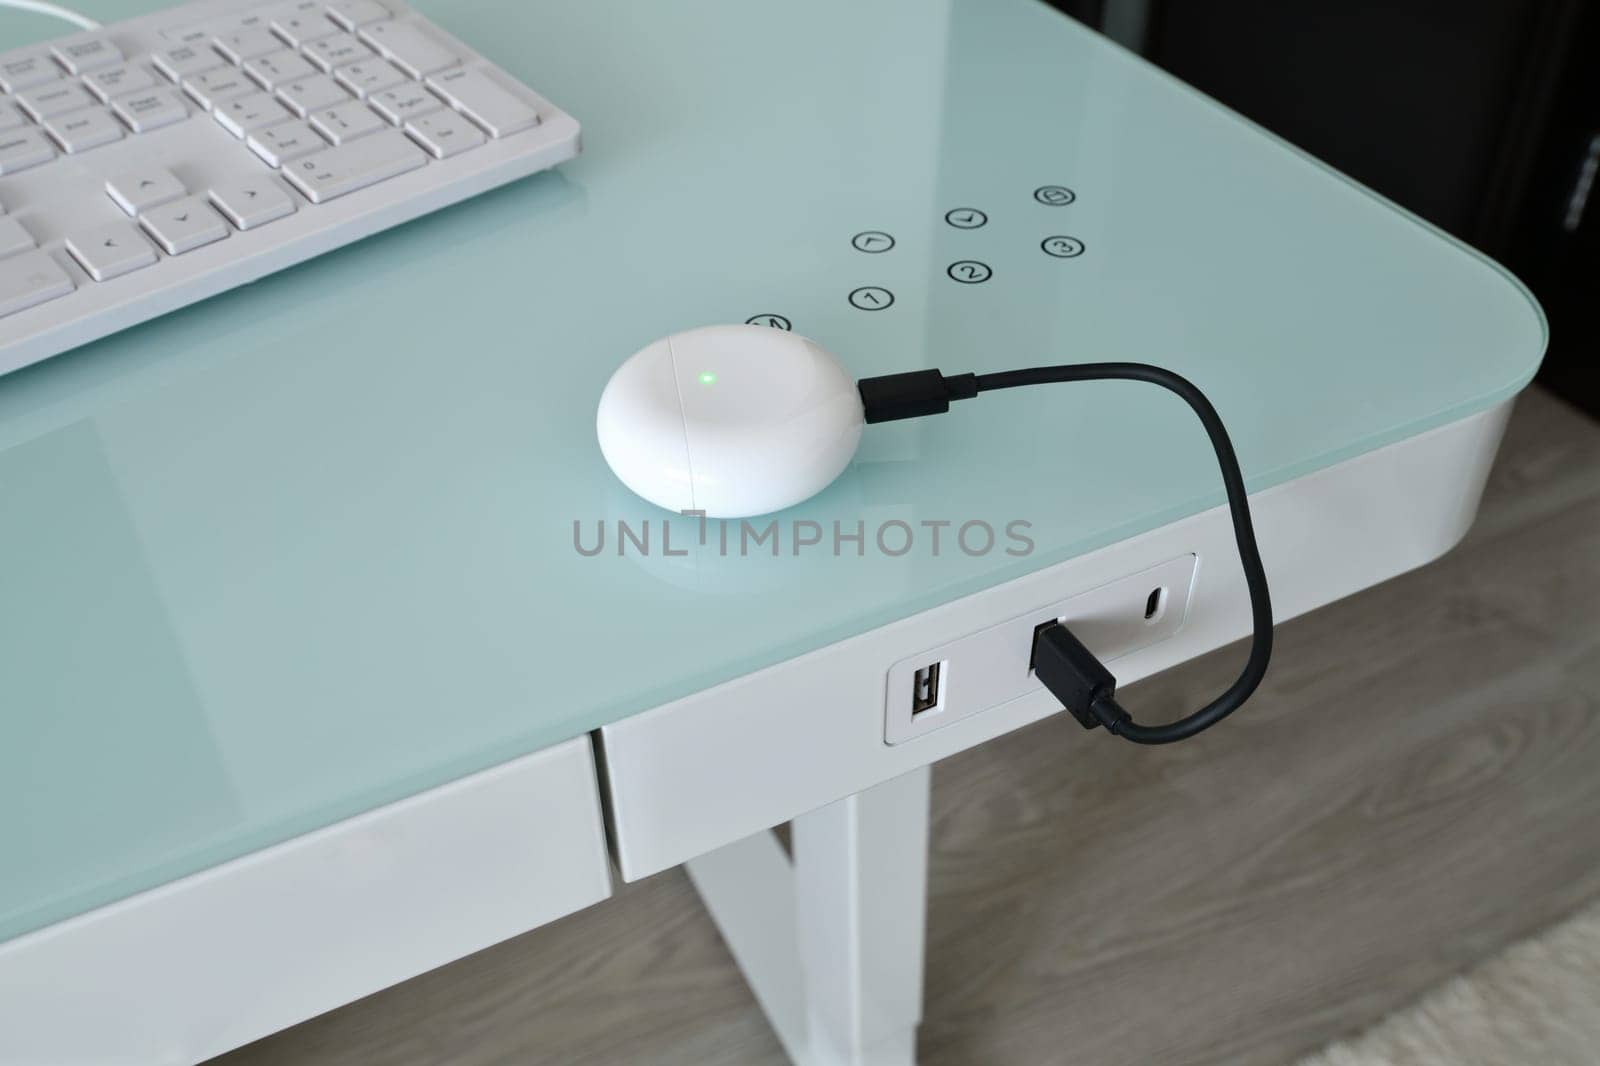 Box for wireless headphones is charged from the USB table by olgavolodina